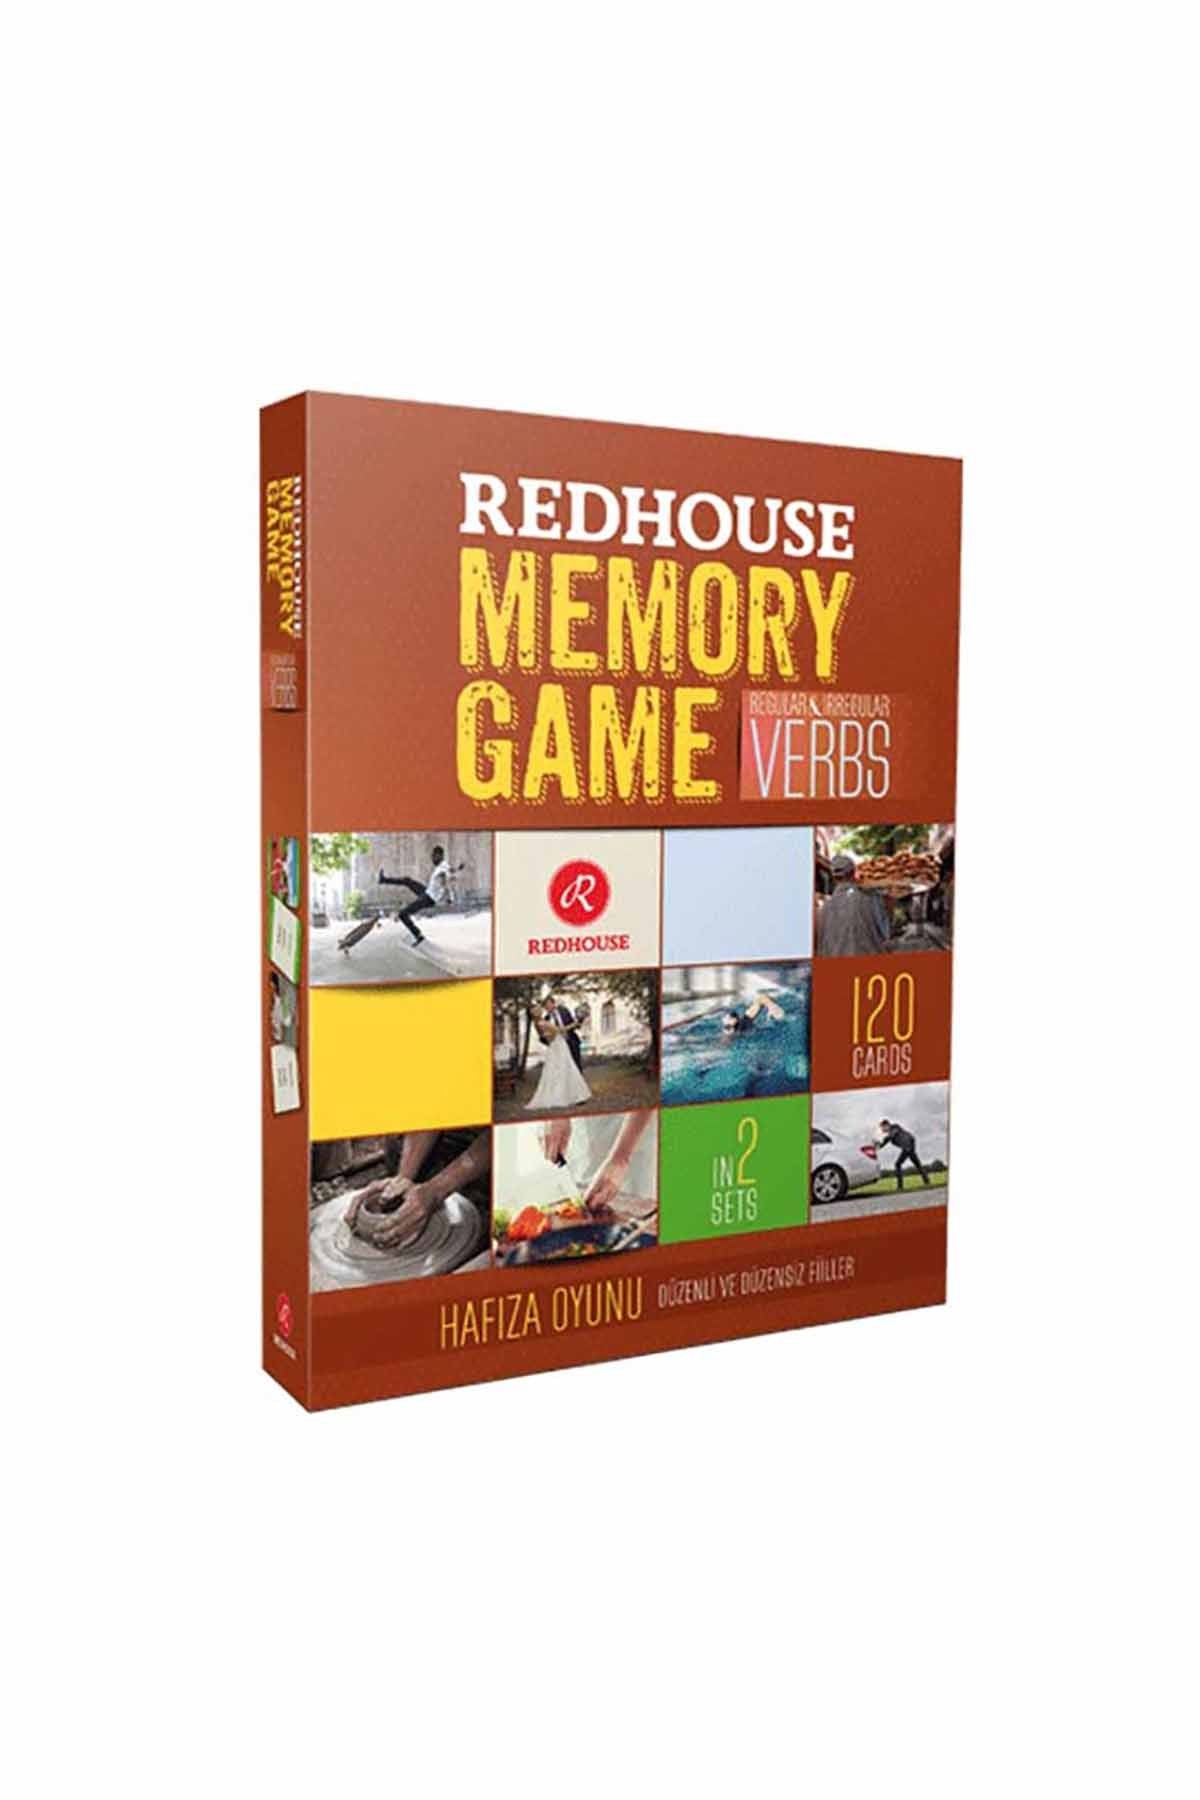 Redhouse Memory Game Verbs